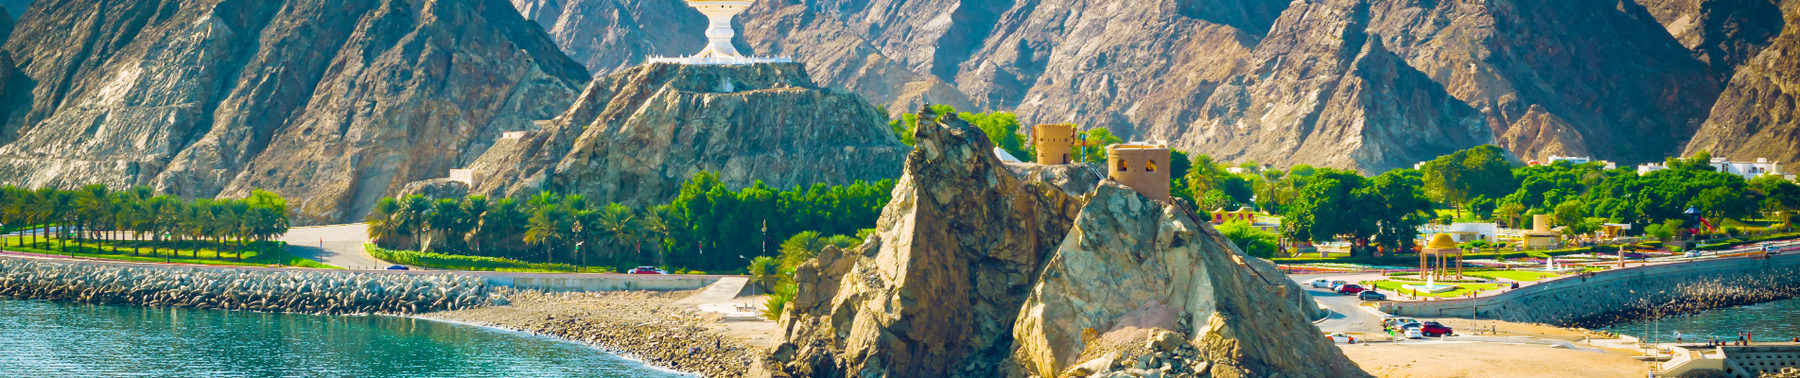 Guided Tours of Oman